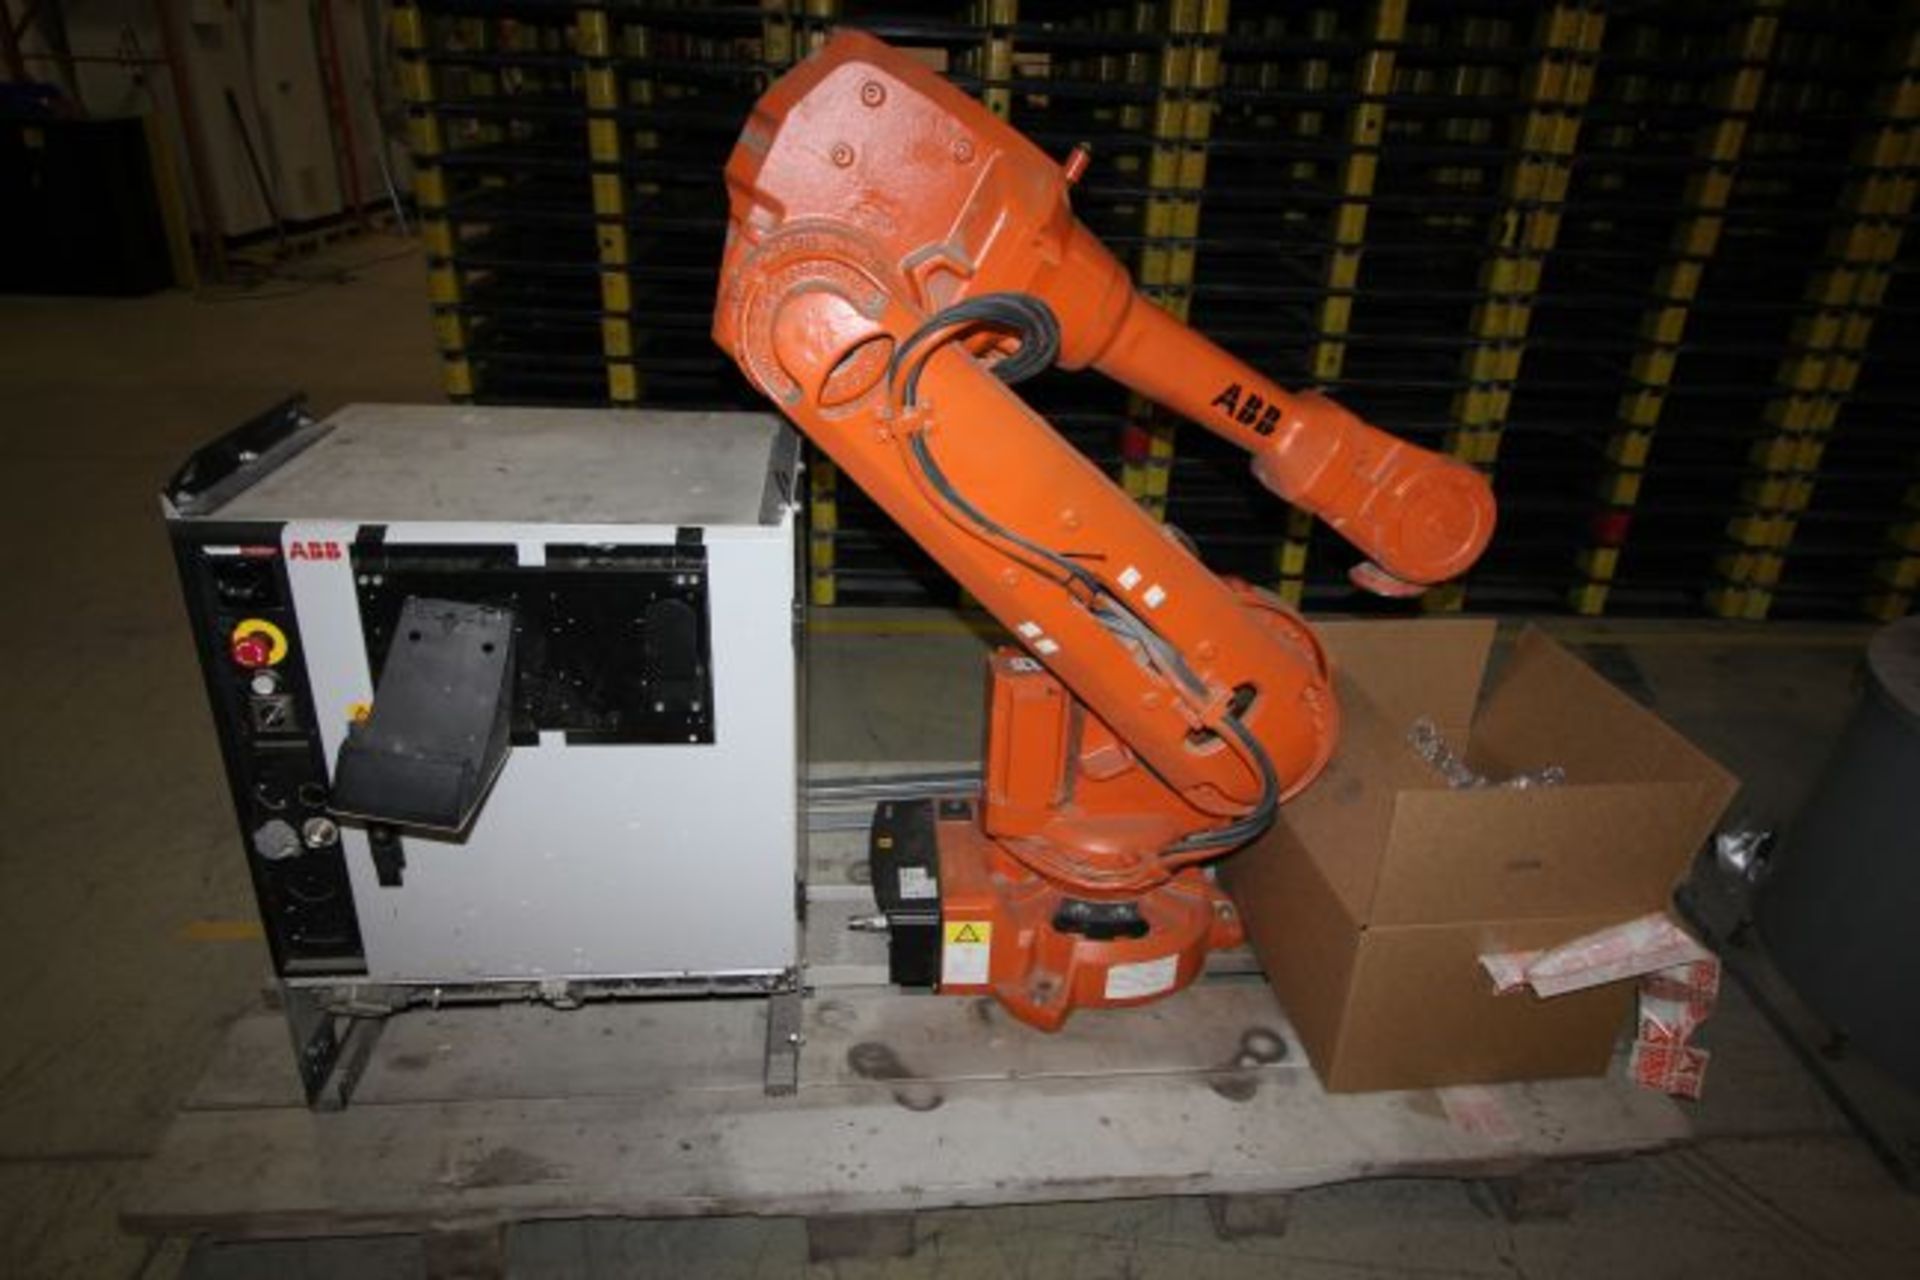 ABB ROBOT IRB 4600 2.05/45KG WITH IRC5 CONTROLS, YEAR 2014, SN 500289 CABLES NO TEACH PENDANT